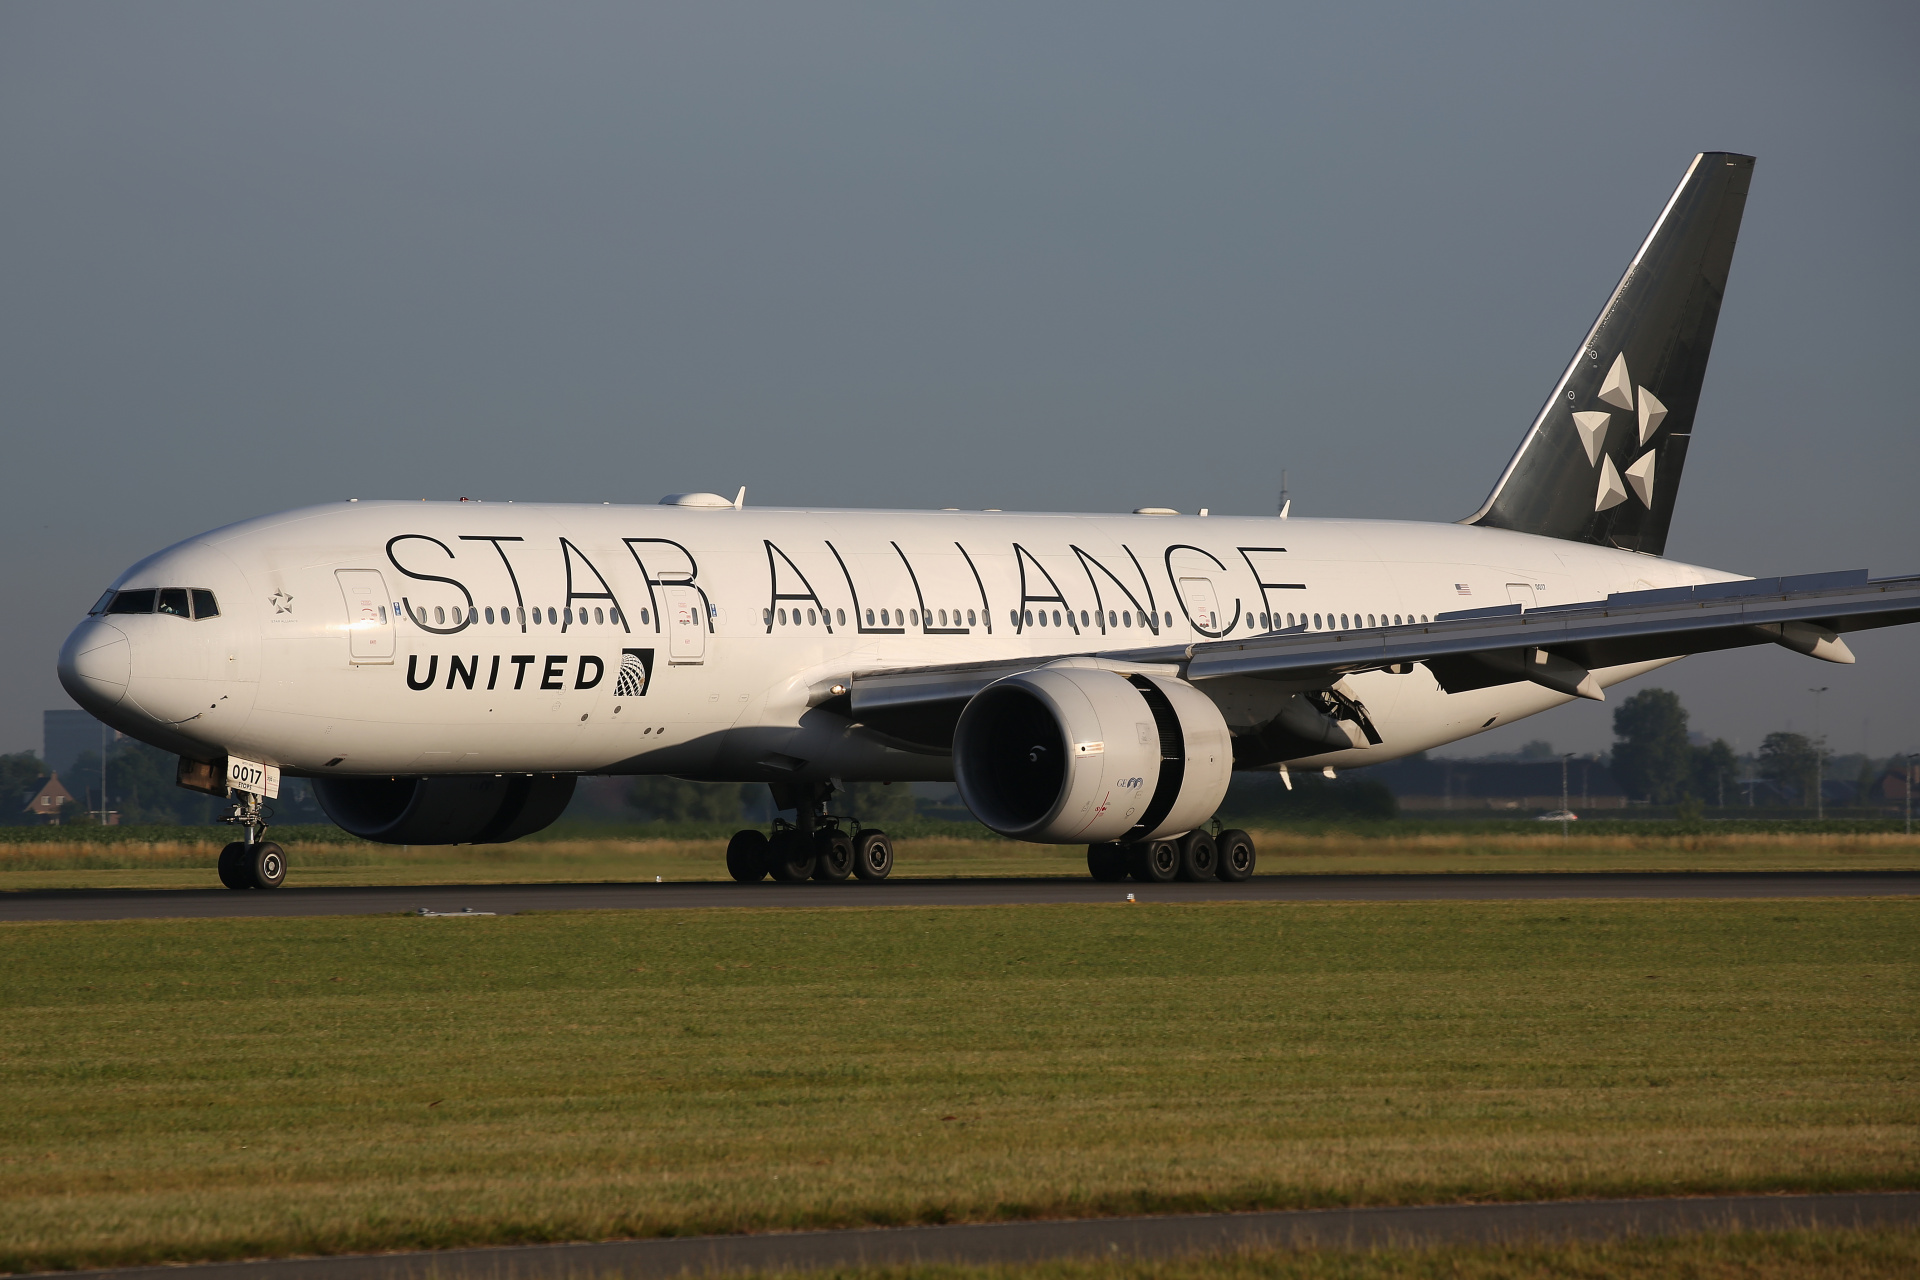 N78017 (Star Alliance livery) (Aircraft » Schiphol Spotting » Boeing 777-200/-ER » United Airlines)